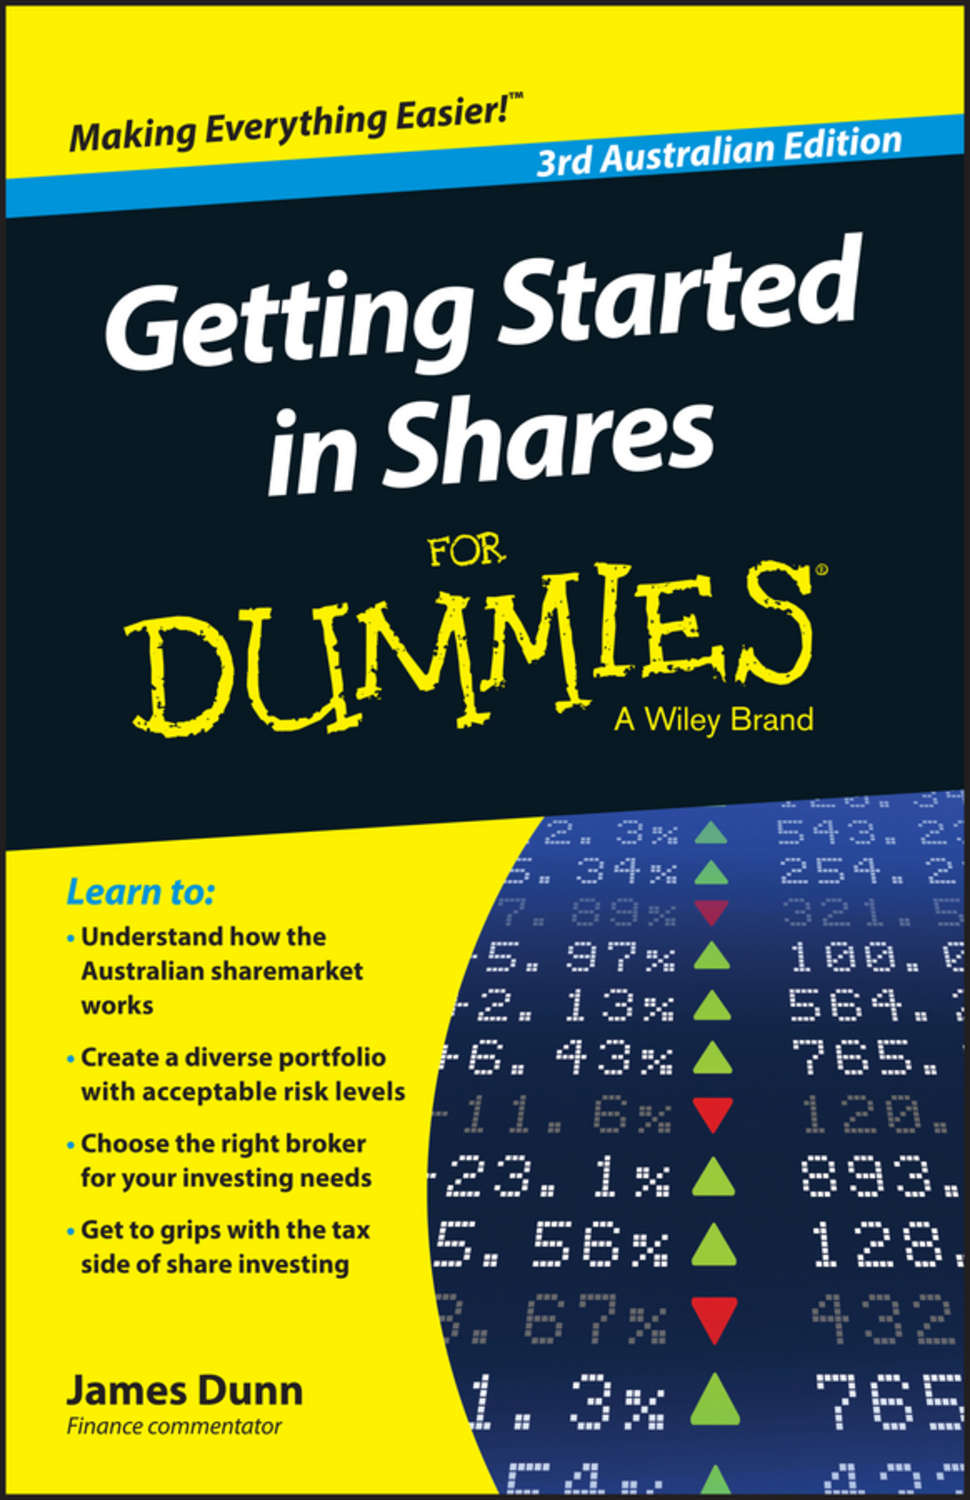 online share investing for dummies australian edition